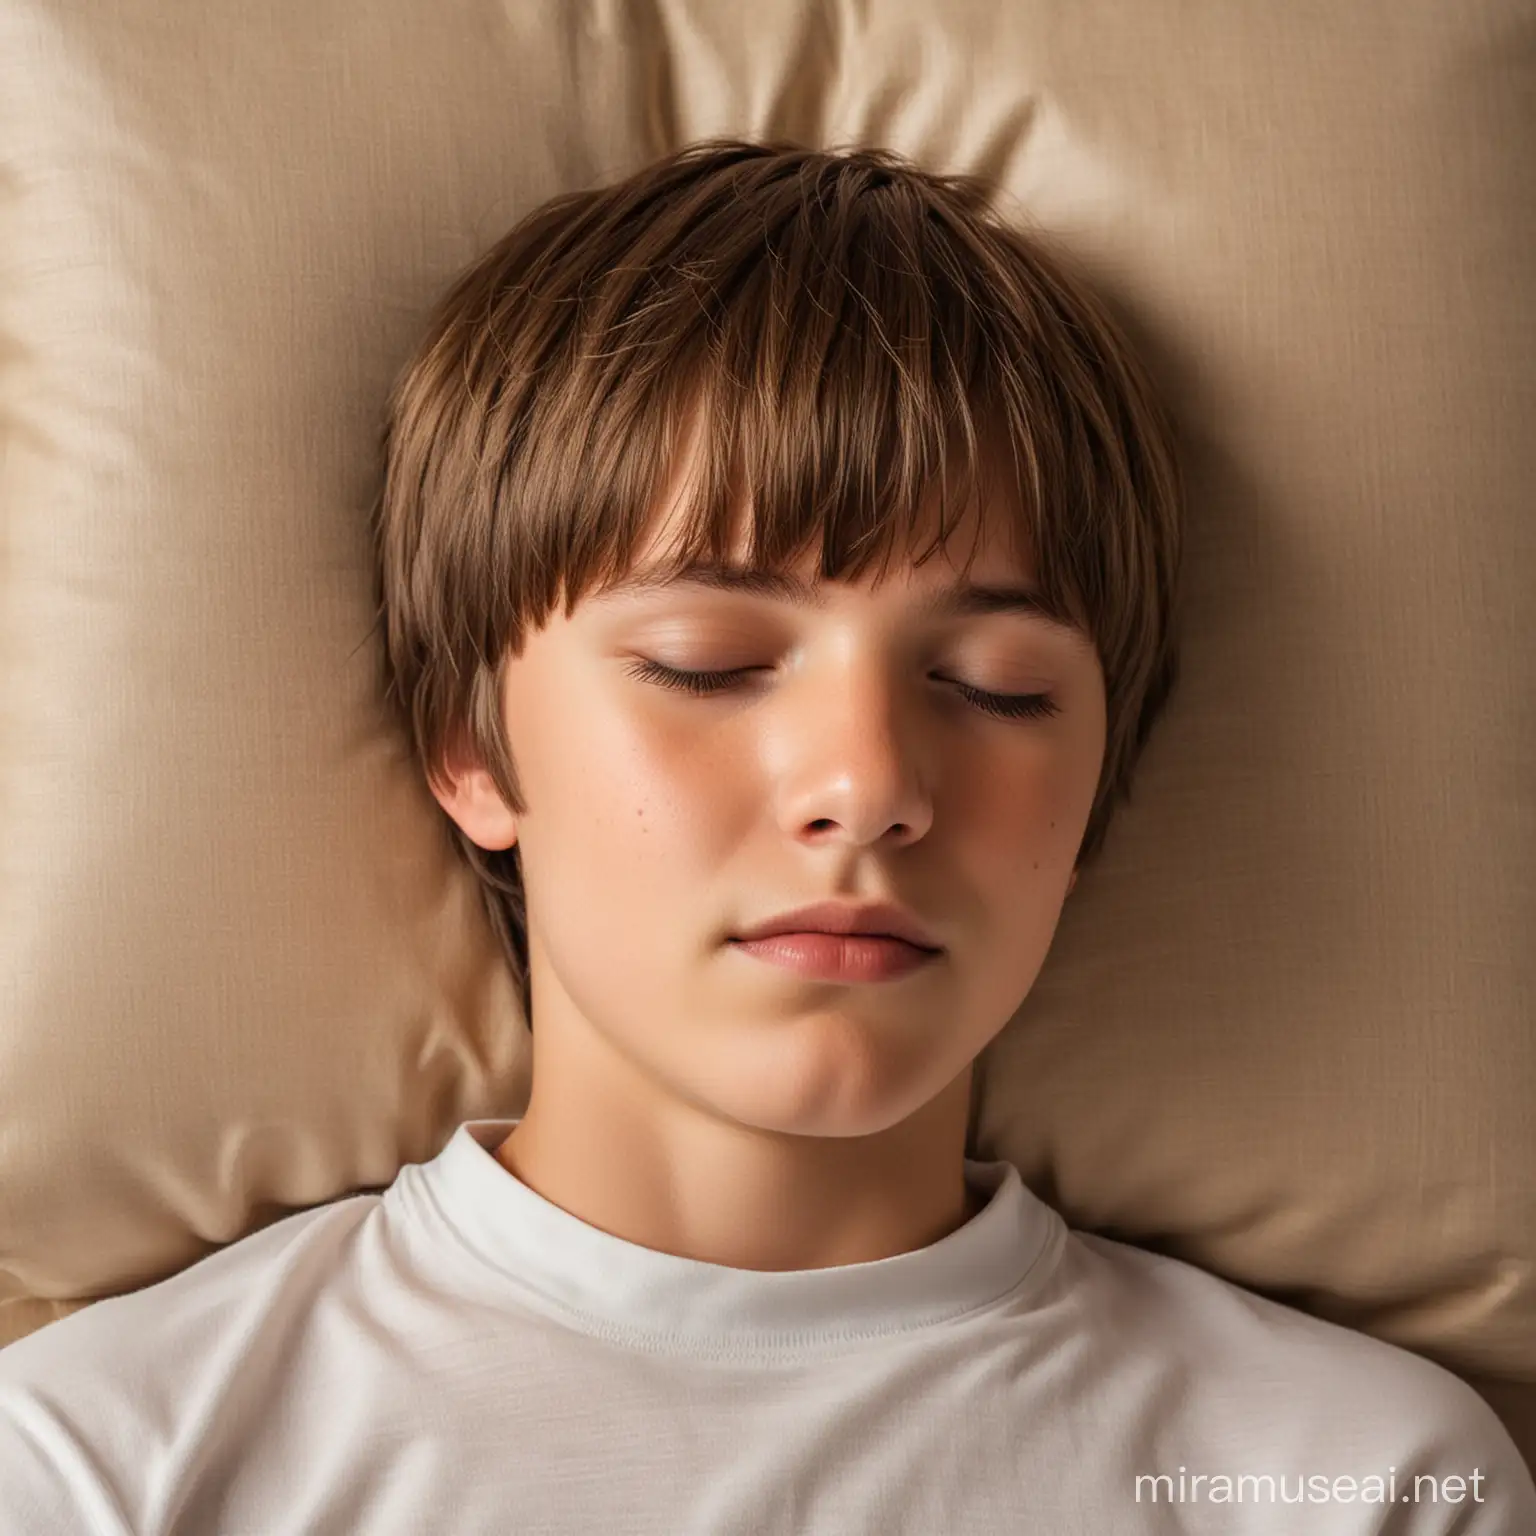 Sleeping ten year old boy, soft, bowl cut, shiny light brown highlights, side of face on pillow, light overhead